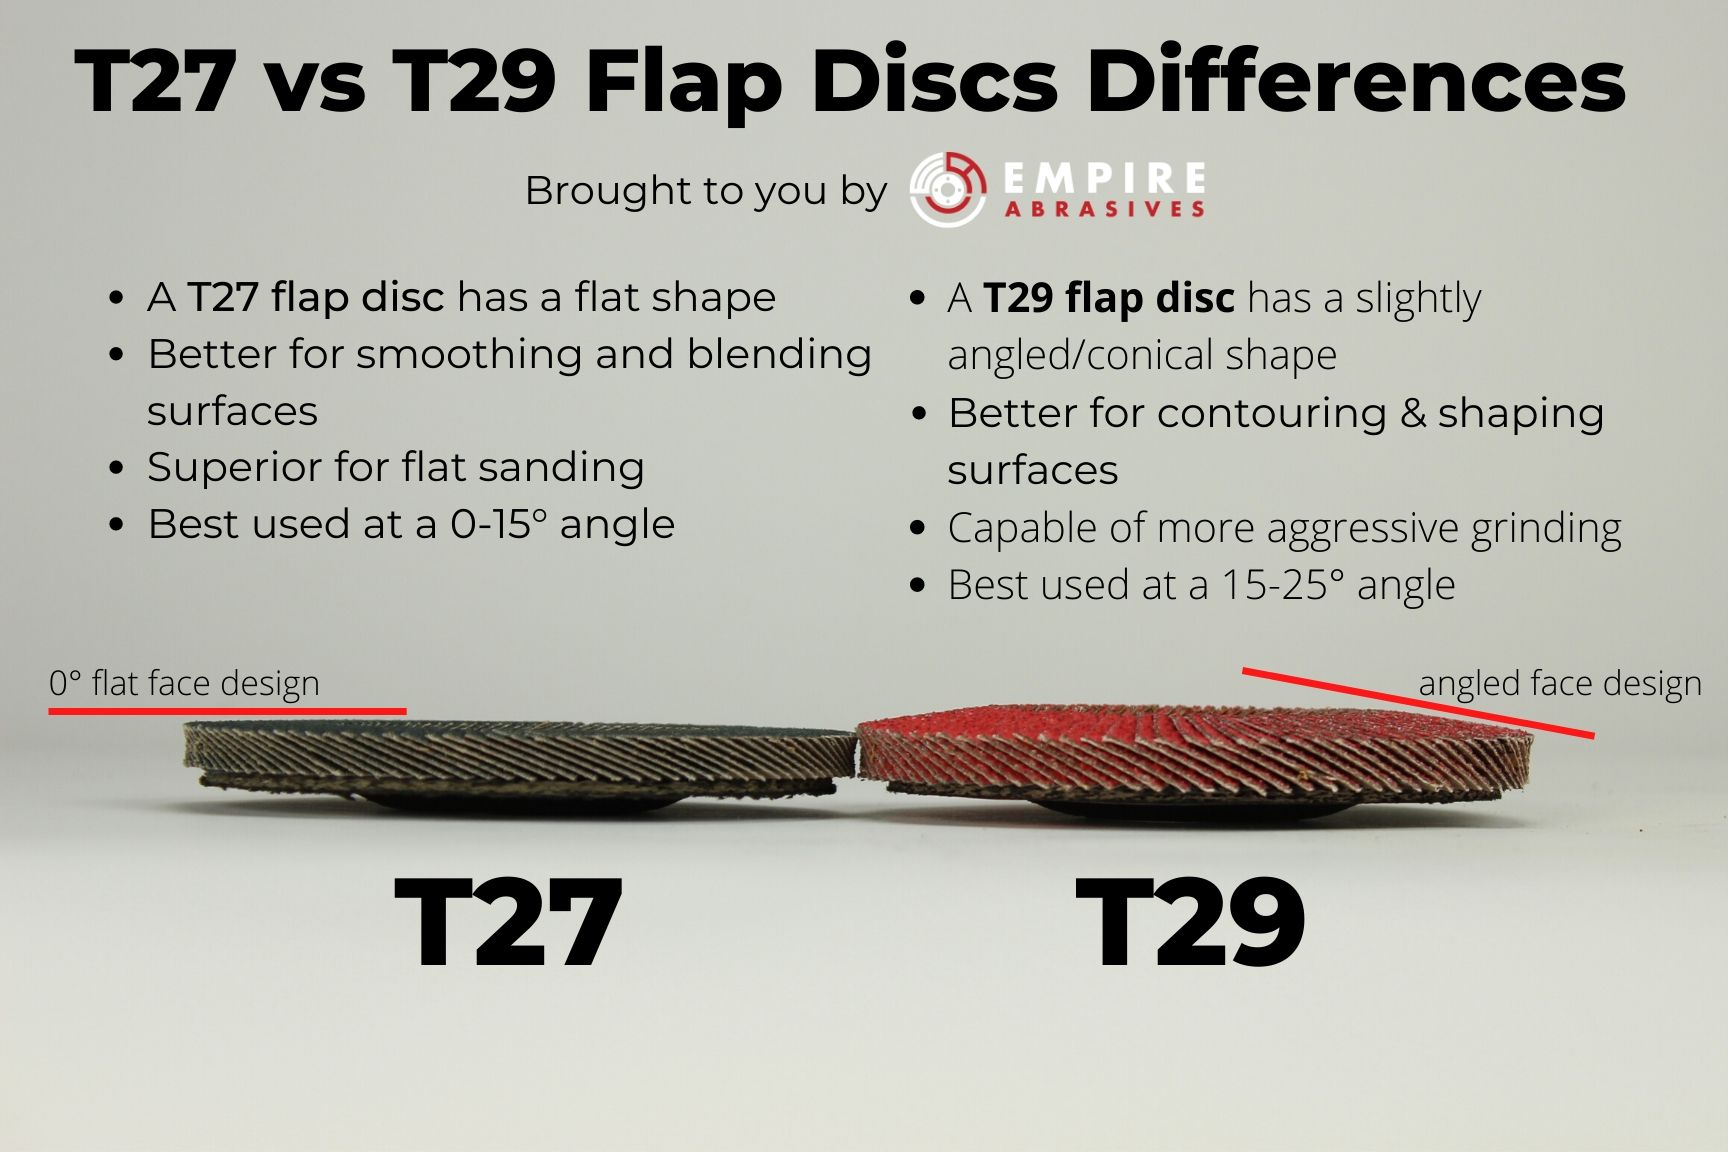 Infographic comparing the differences between T27 and T29 flap discs